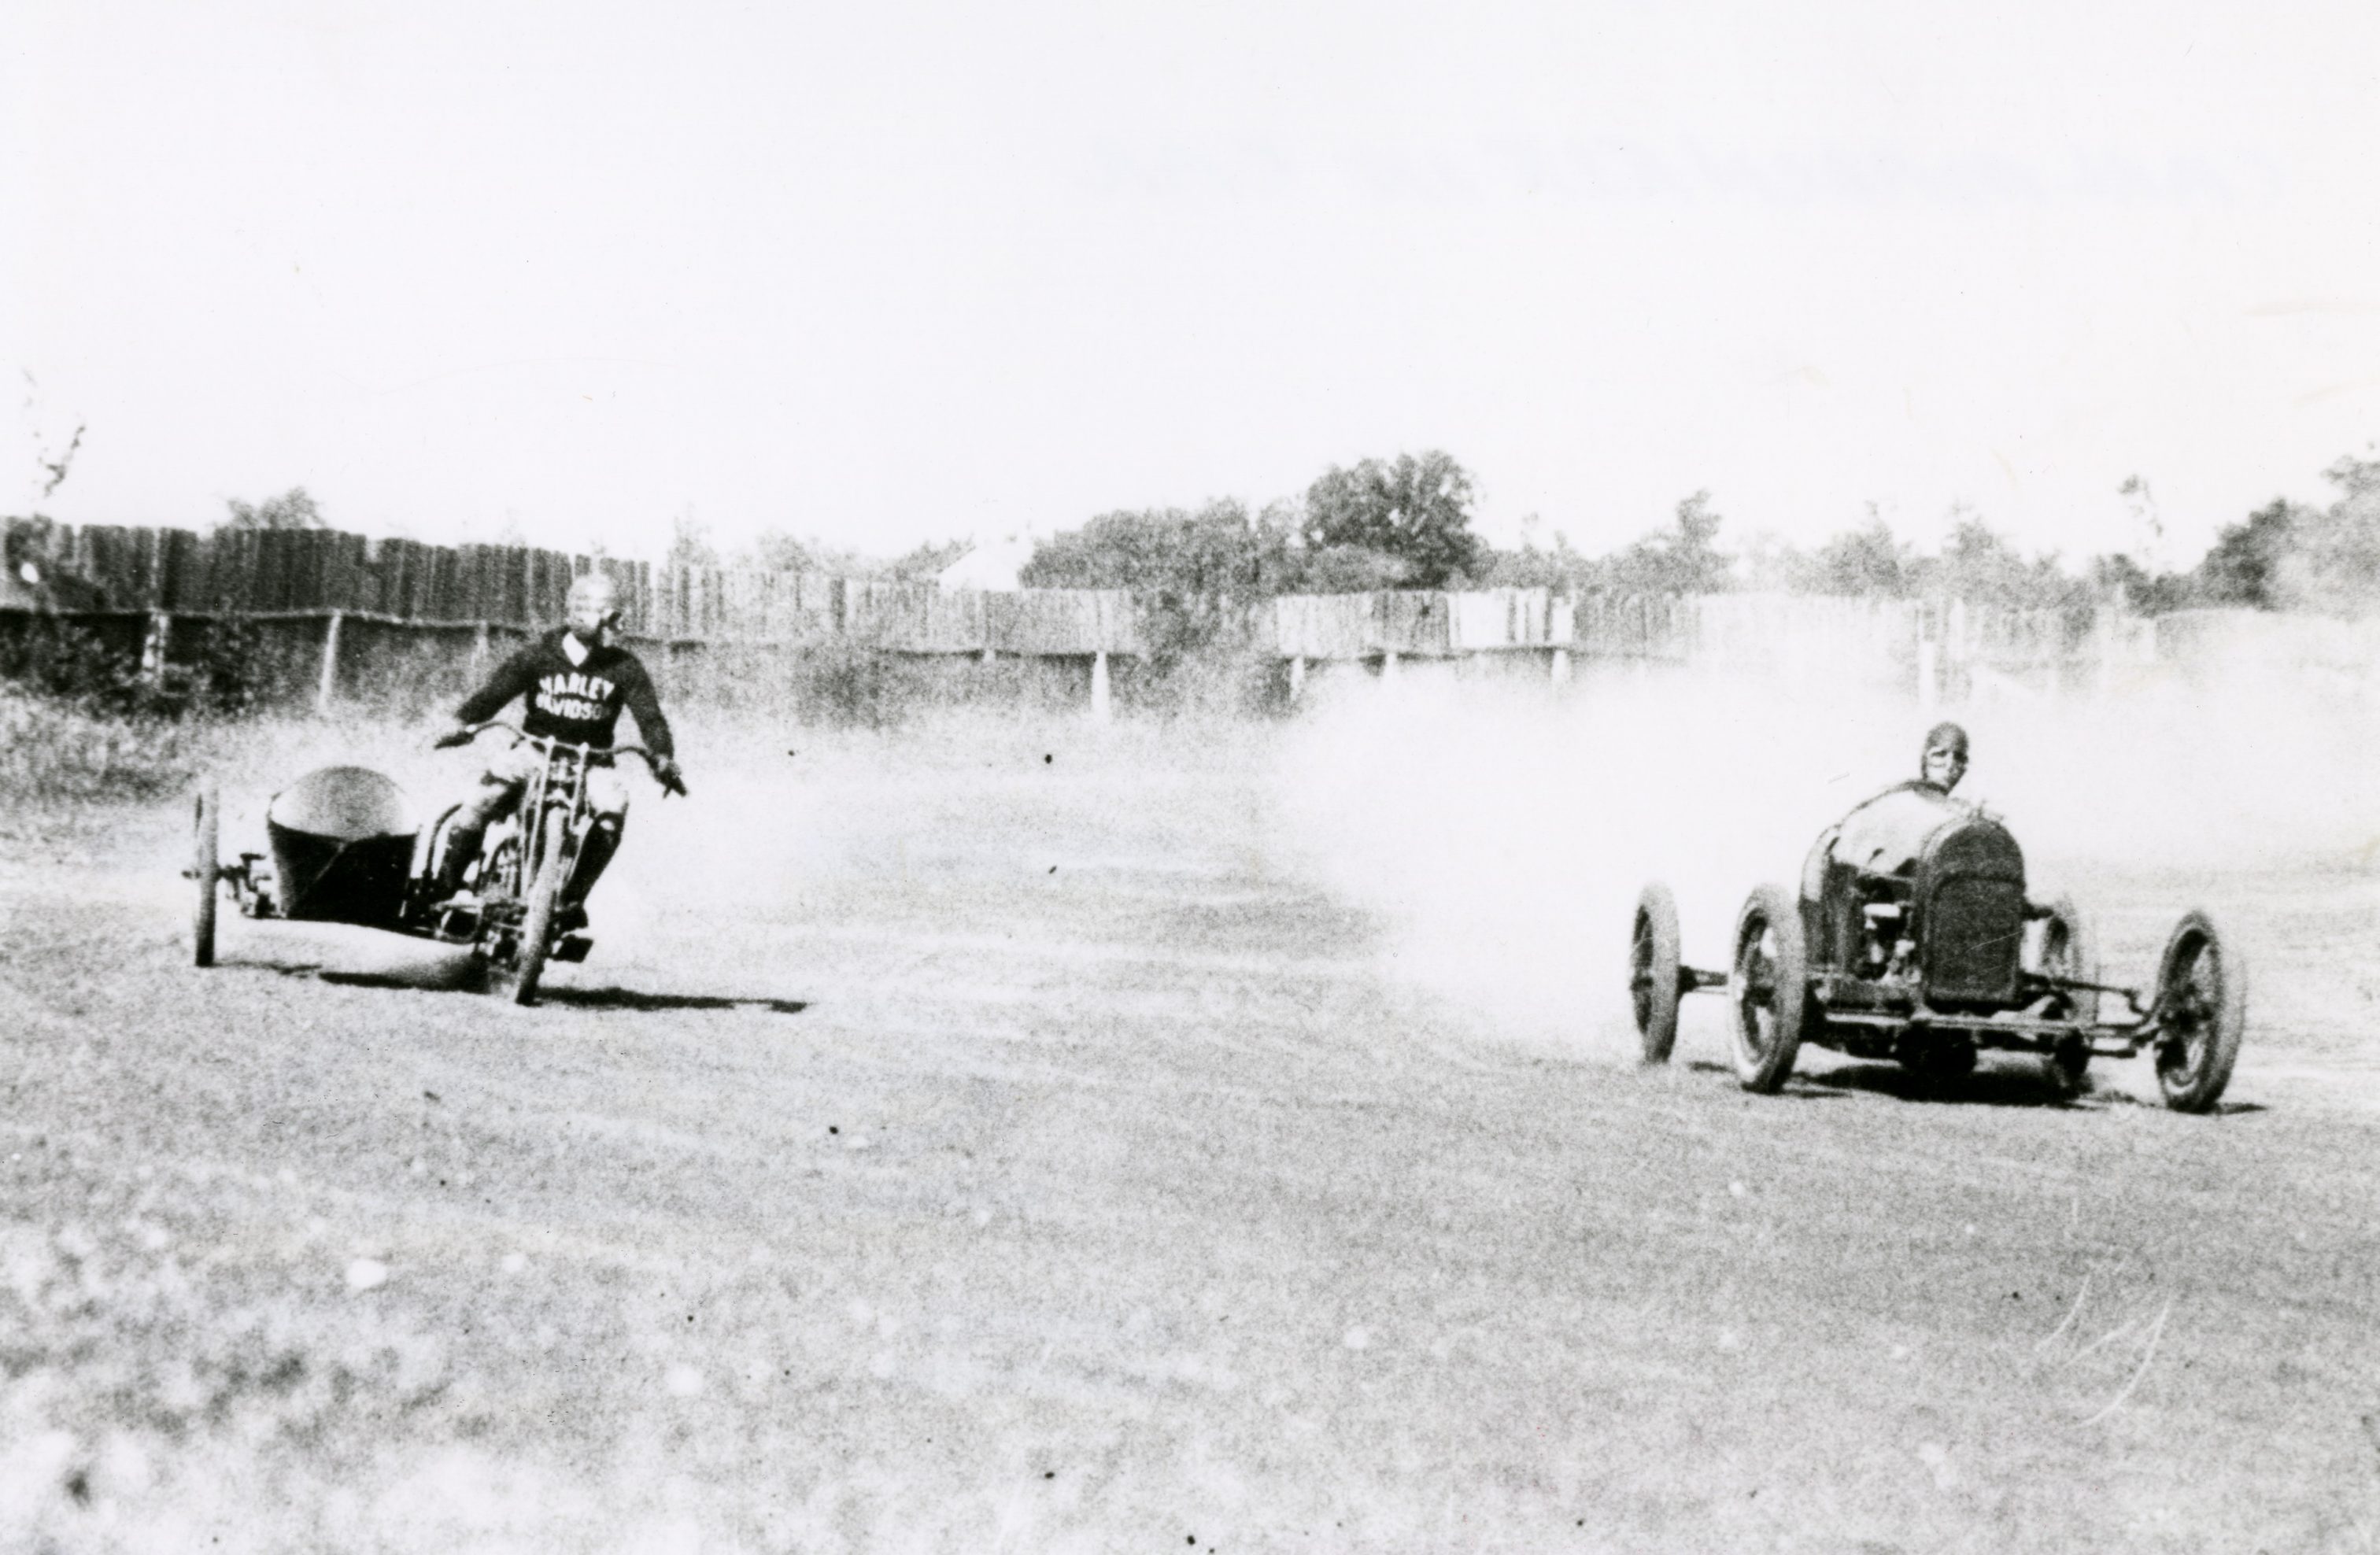 A man wearing a Harley Davidson jacket races an automobile driver at a track in Cedarburg some time in the 1920s.